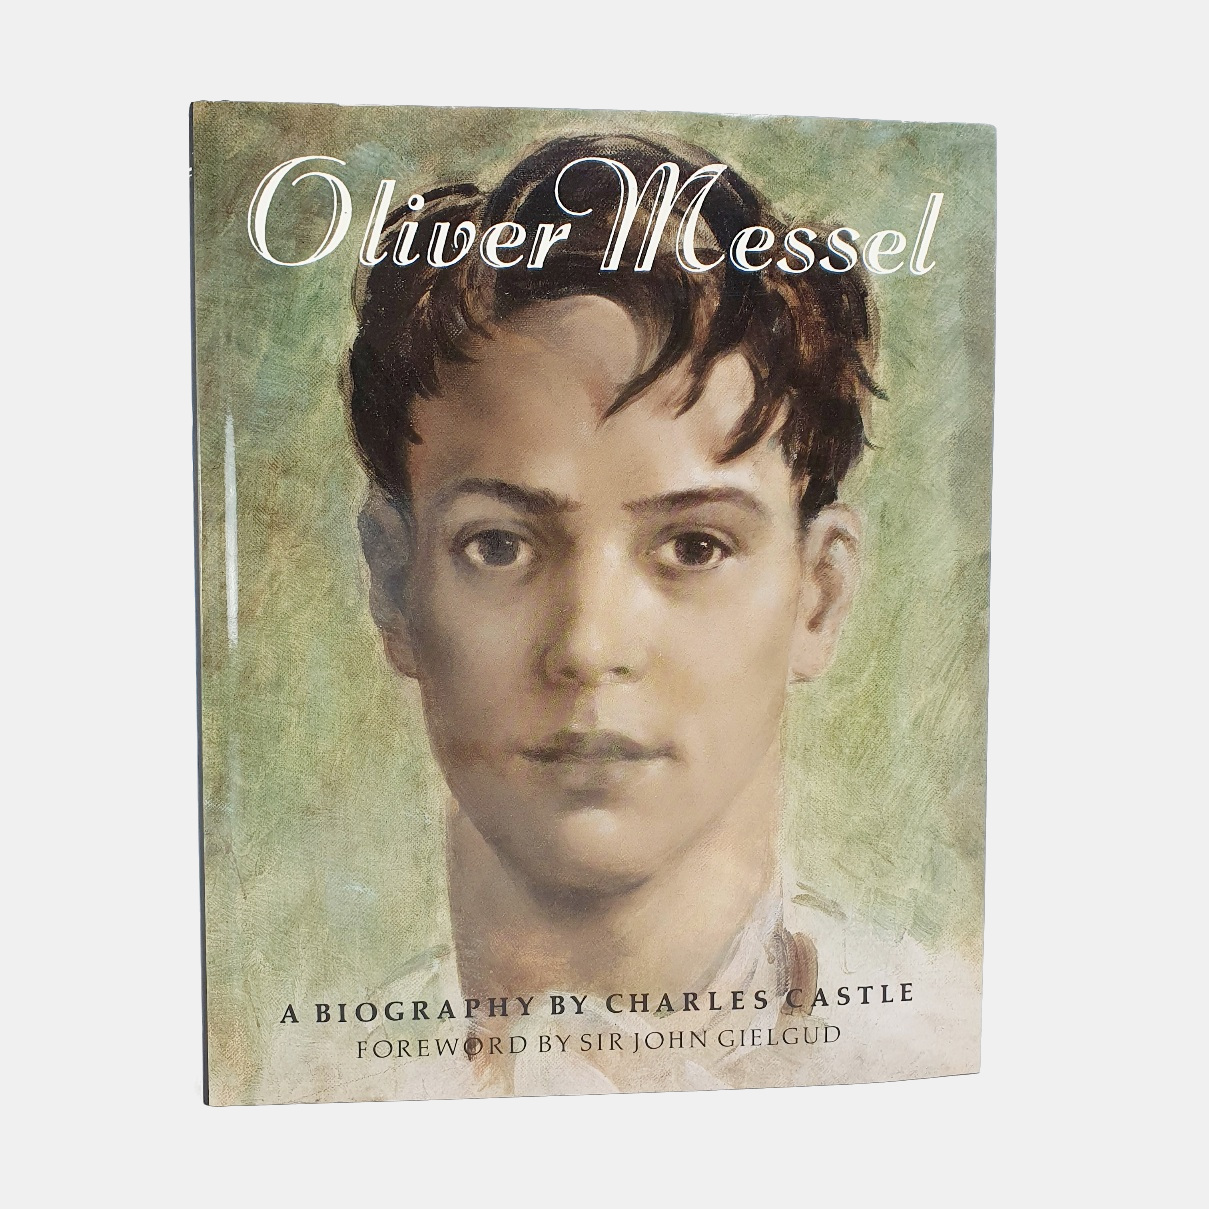 Oliver Messel. A Biography